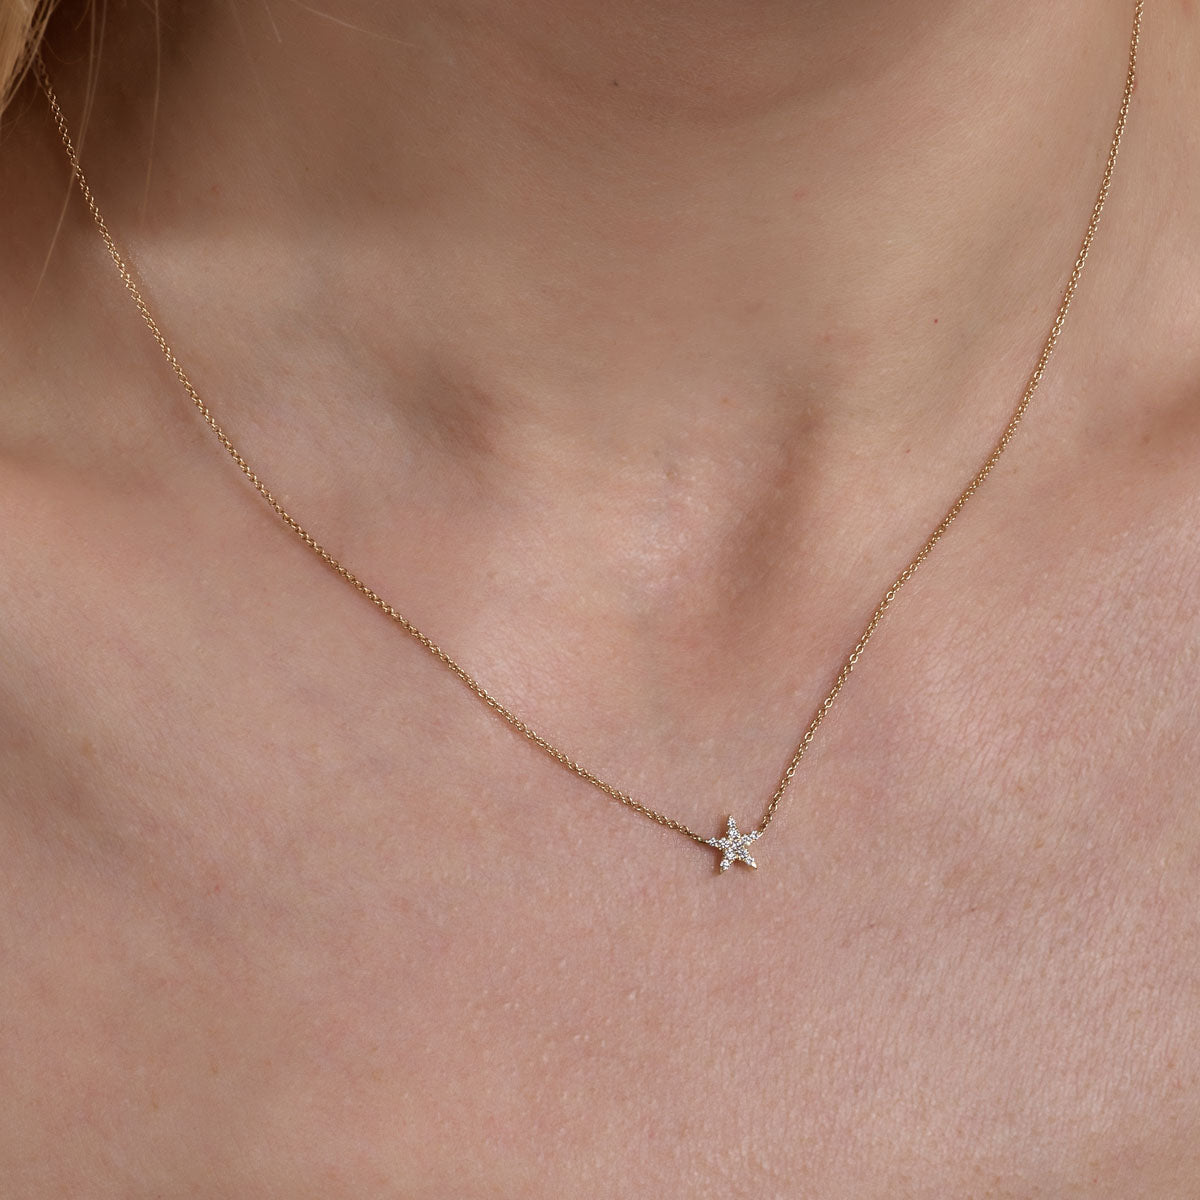 gold diamond star necklace on womans neck